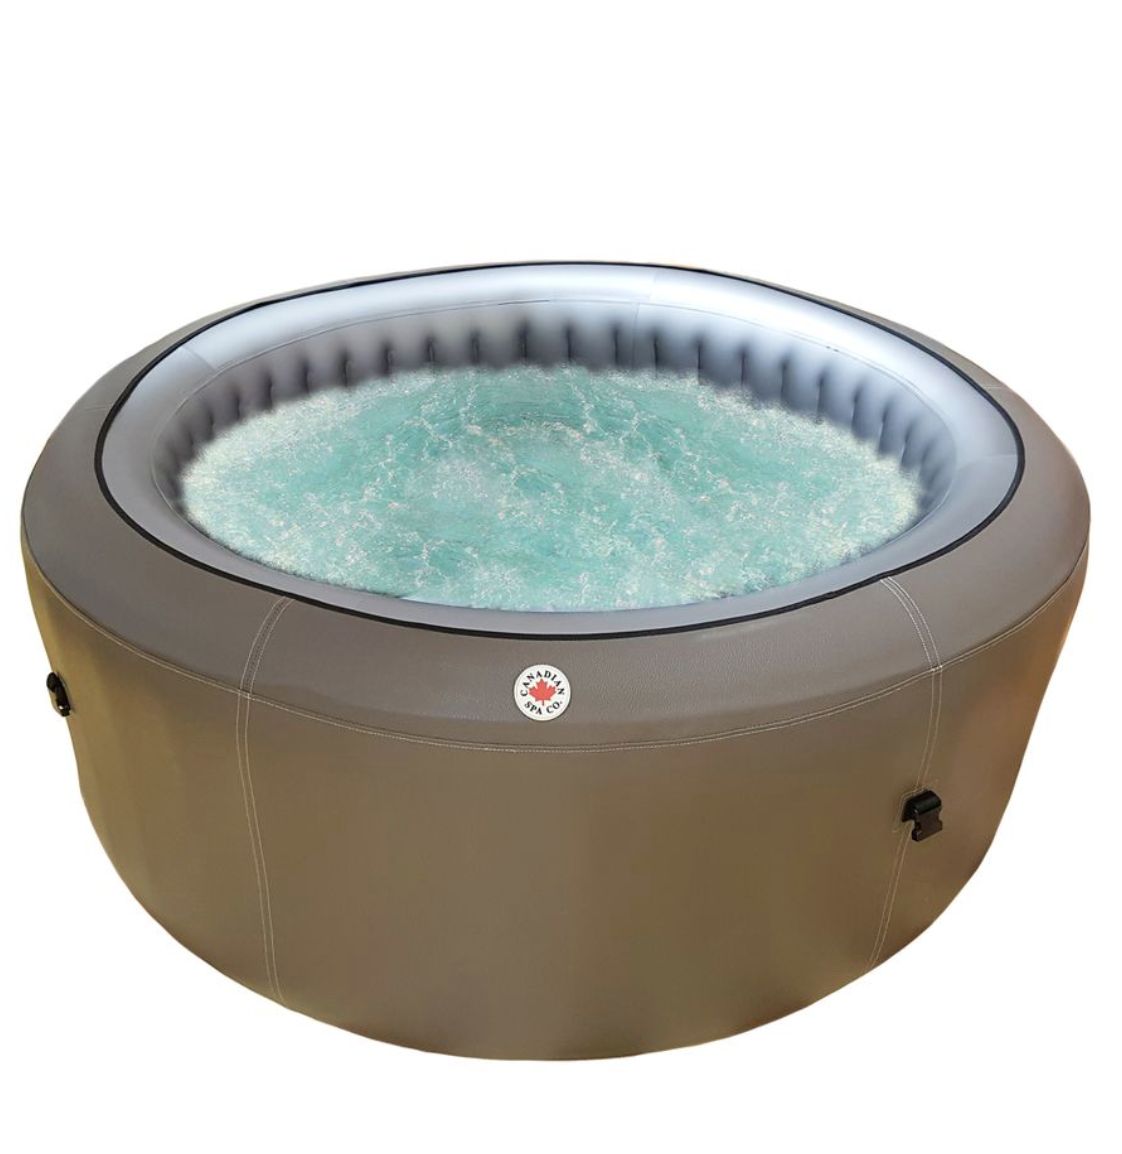 Canadian Spa Company_KA-10155_FLOATING THERMAL BLANKET - GRAND RAPIDS 130CM ROUND_Hot Tubs